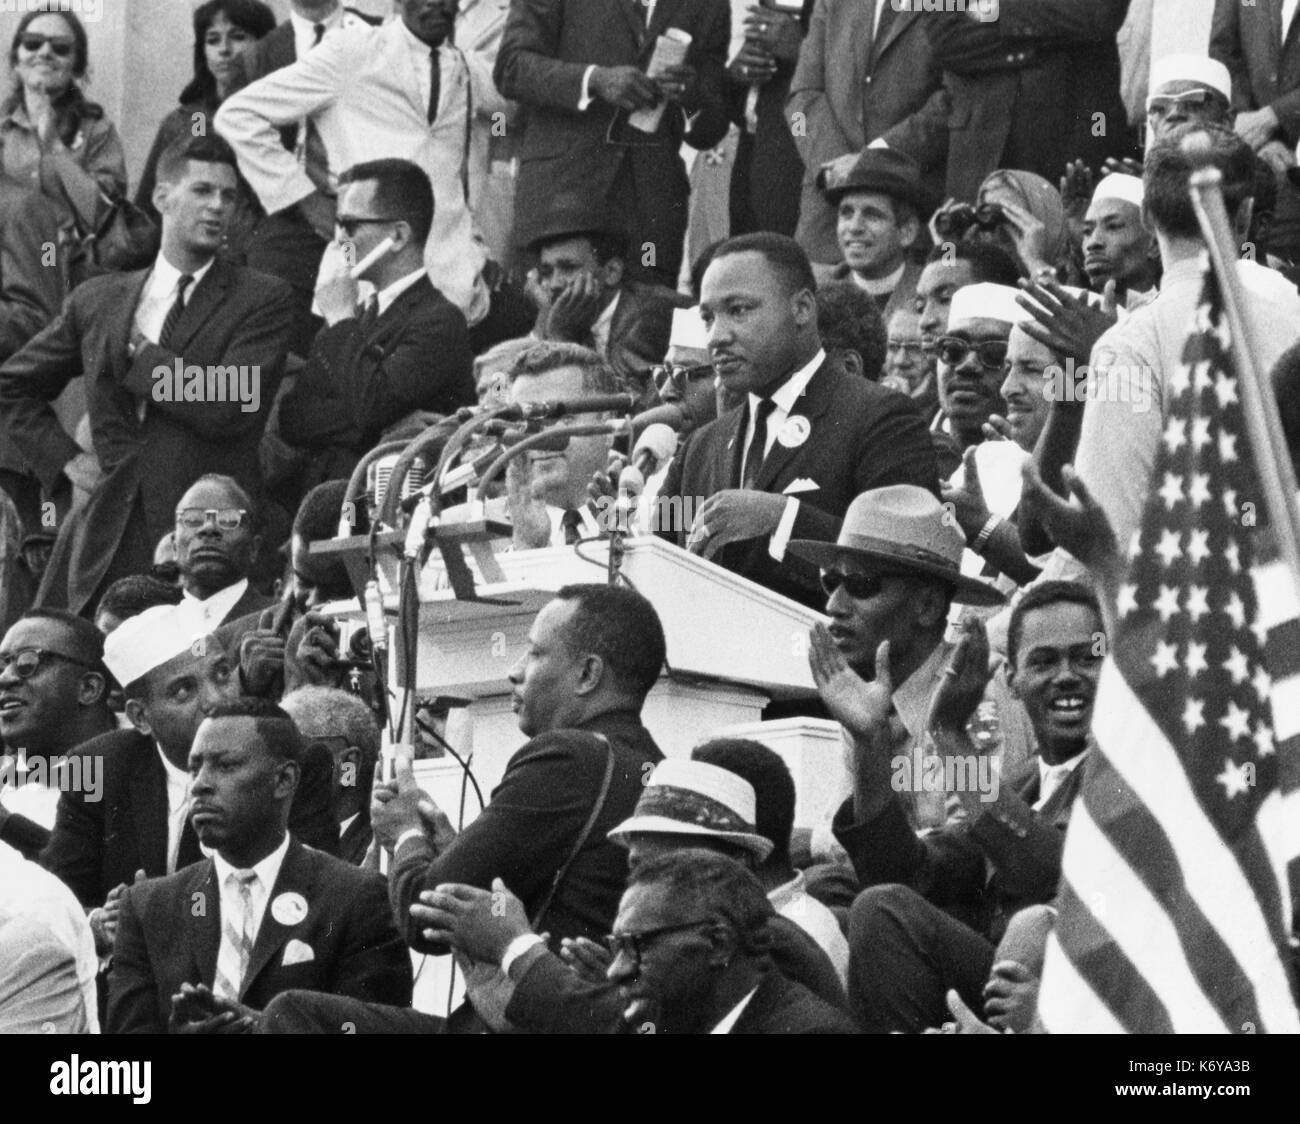 Dr. Martin Luther King, Jr. addresses the crowd on the steps of the Lincoln Memorial during the historic March on Washington. 1963. Stock Photo